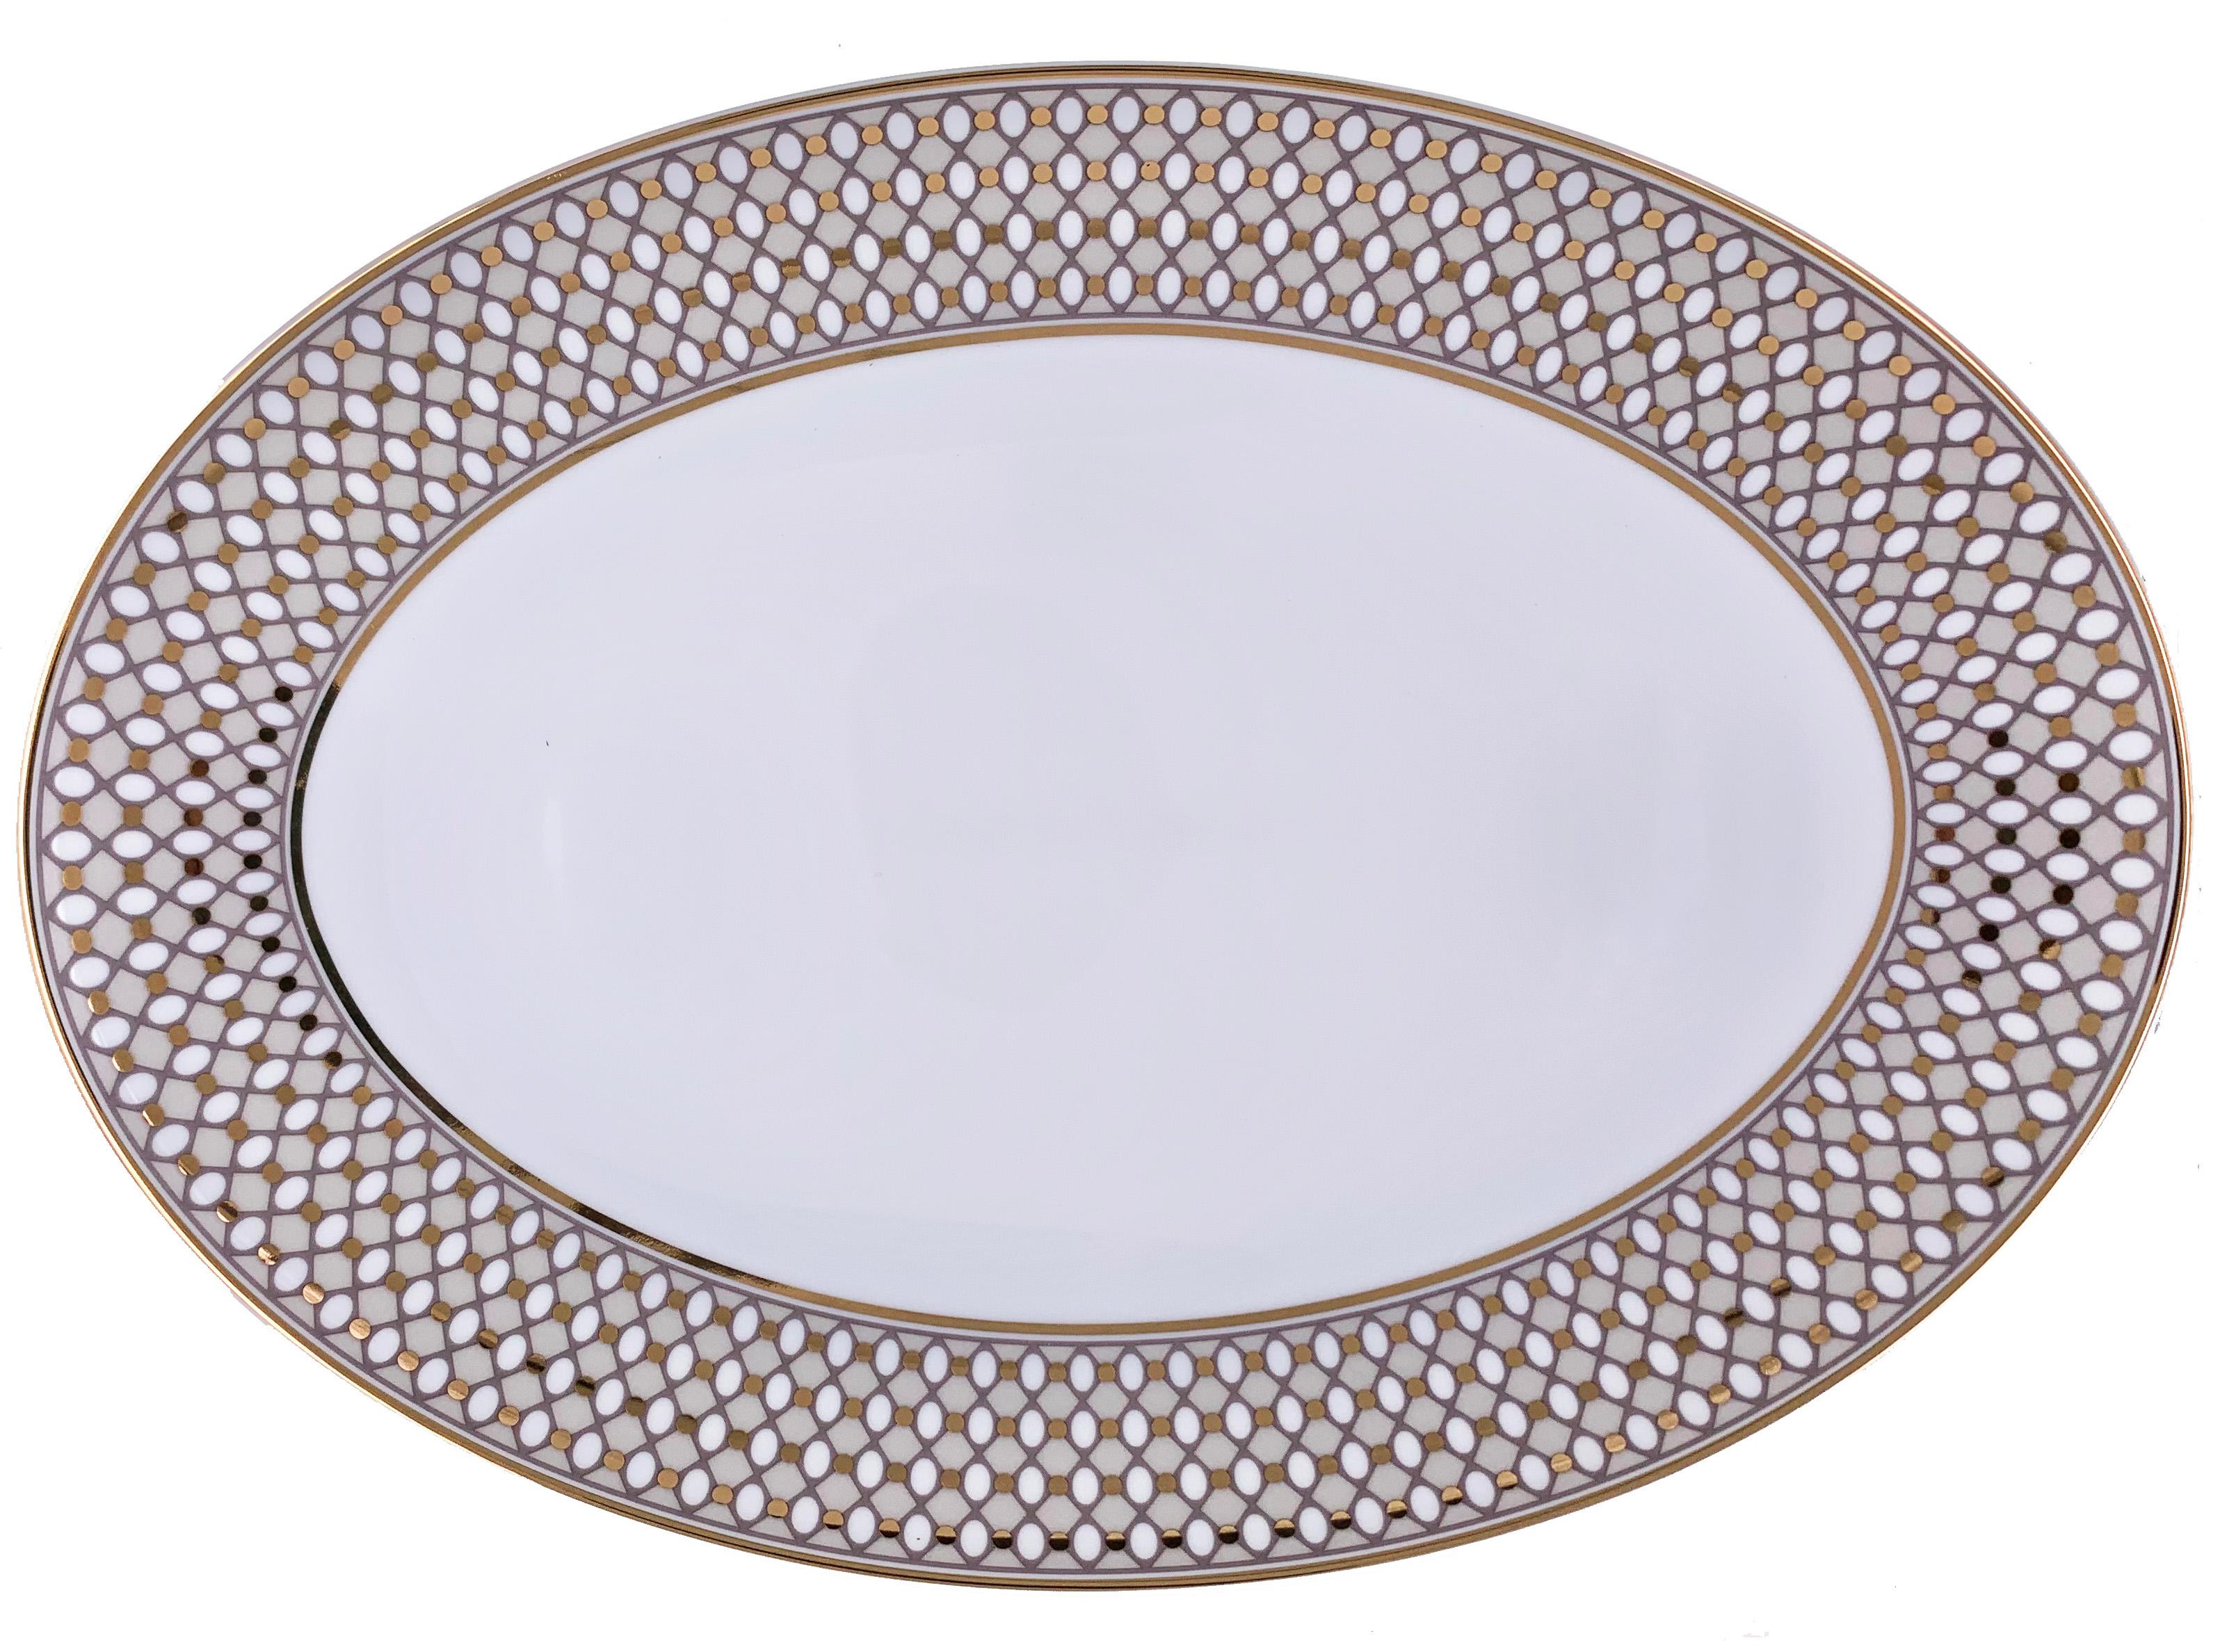 Larger quantities available upon request, with 8 weeks production time.

Description: Medium oval serving plate
Color: Beige and gold
Size: 31 x 22 x 4 H cm
Material: Porcelain and gold
Collection: Modern vintage.